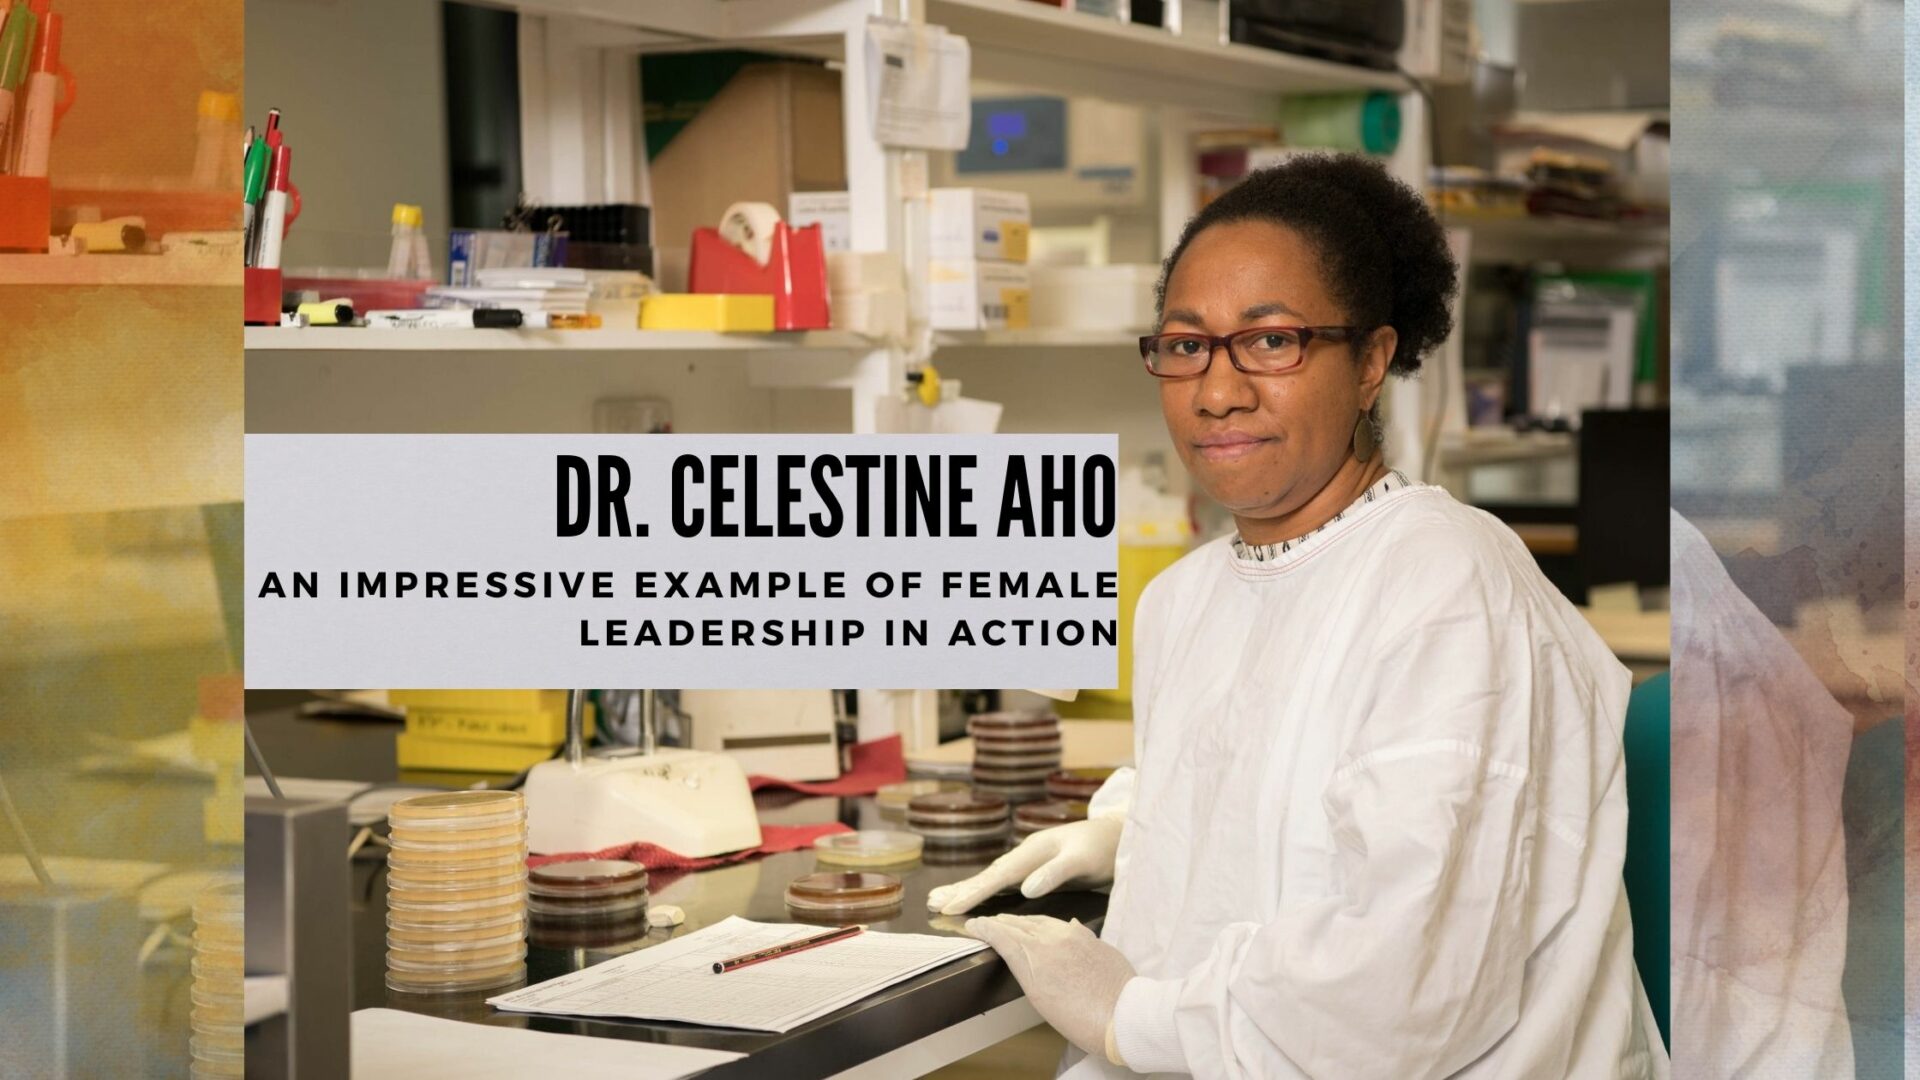 REACHES NEW HEIGHTS FOR PNG HEALTH – Dr. Celestine Aho is an impressive example of female leadership in action in Papua New Guinea